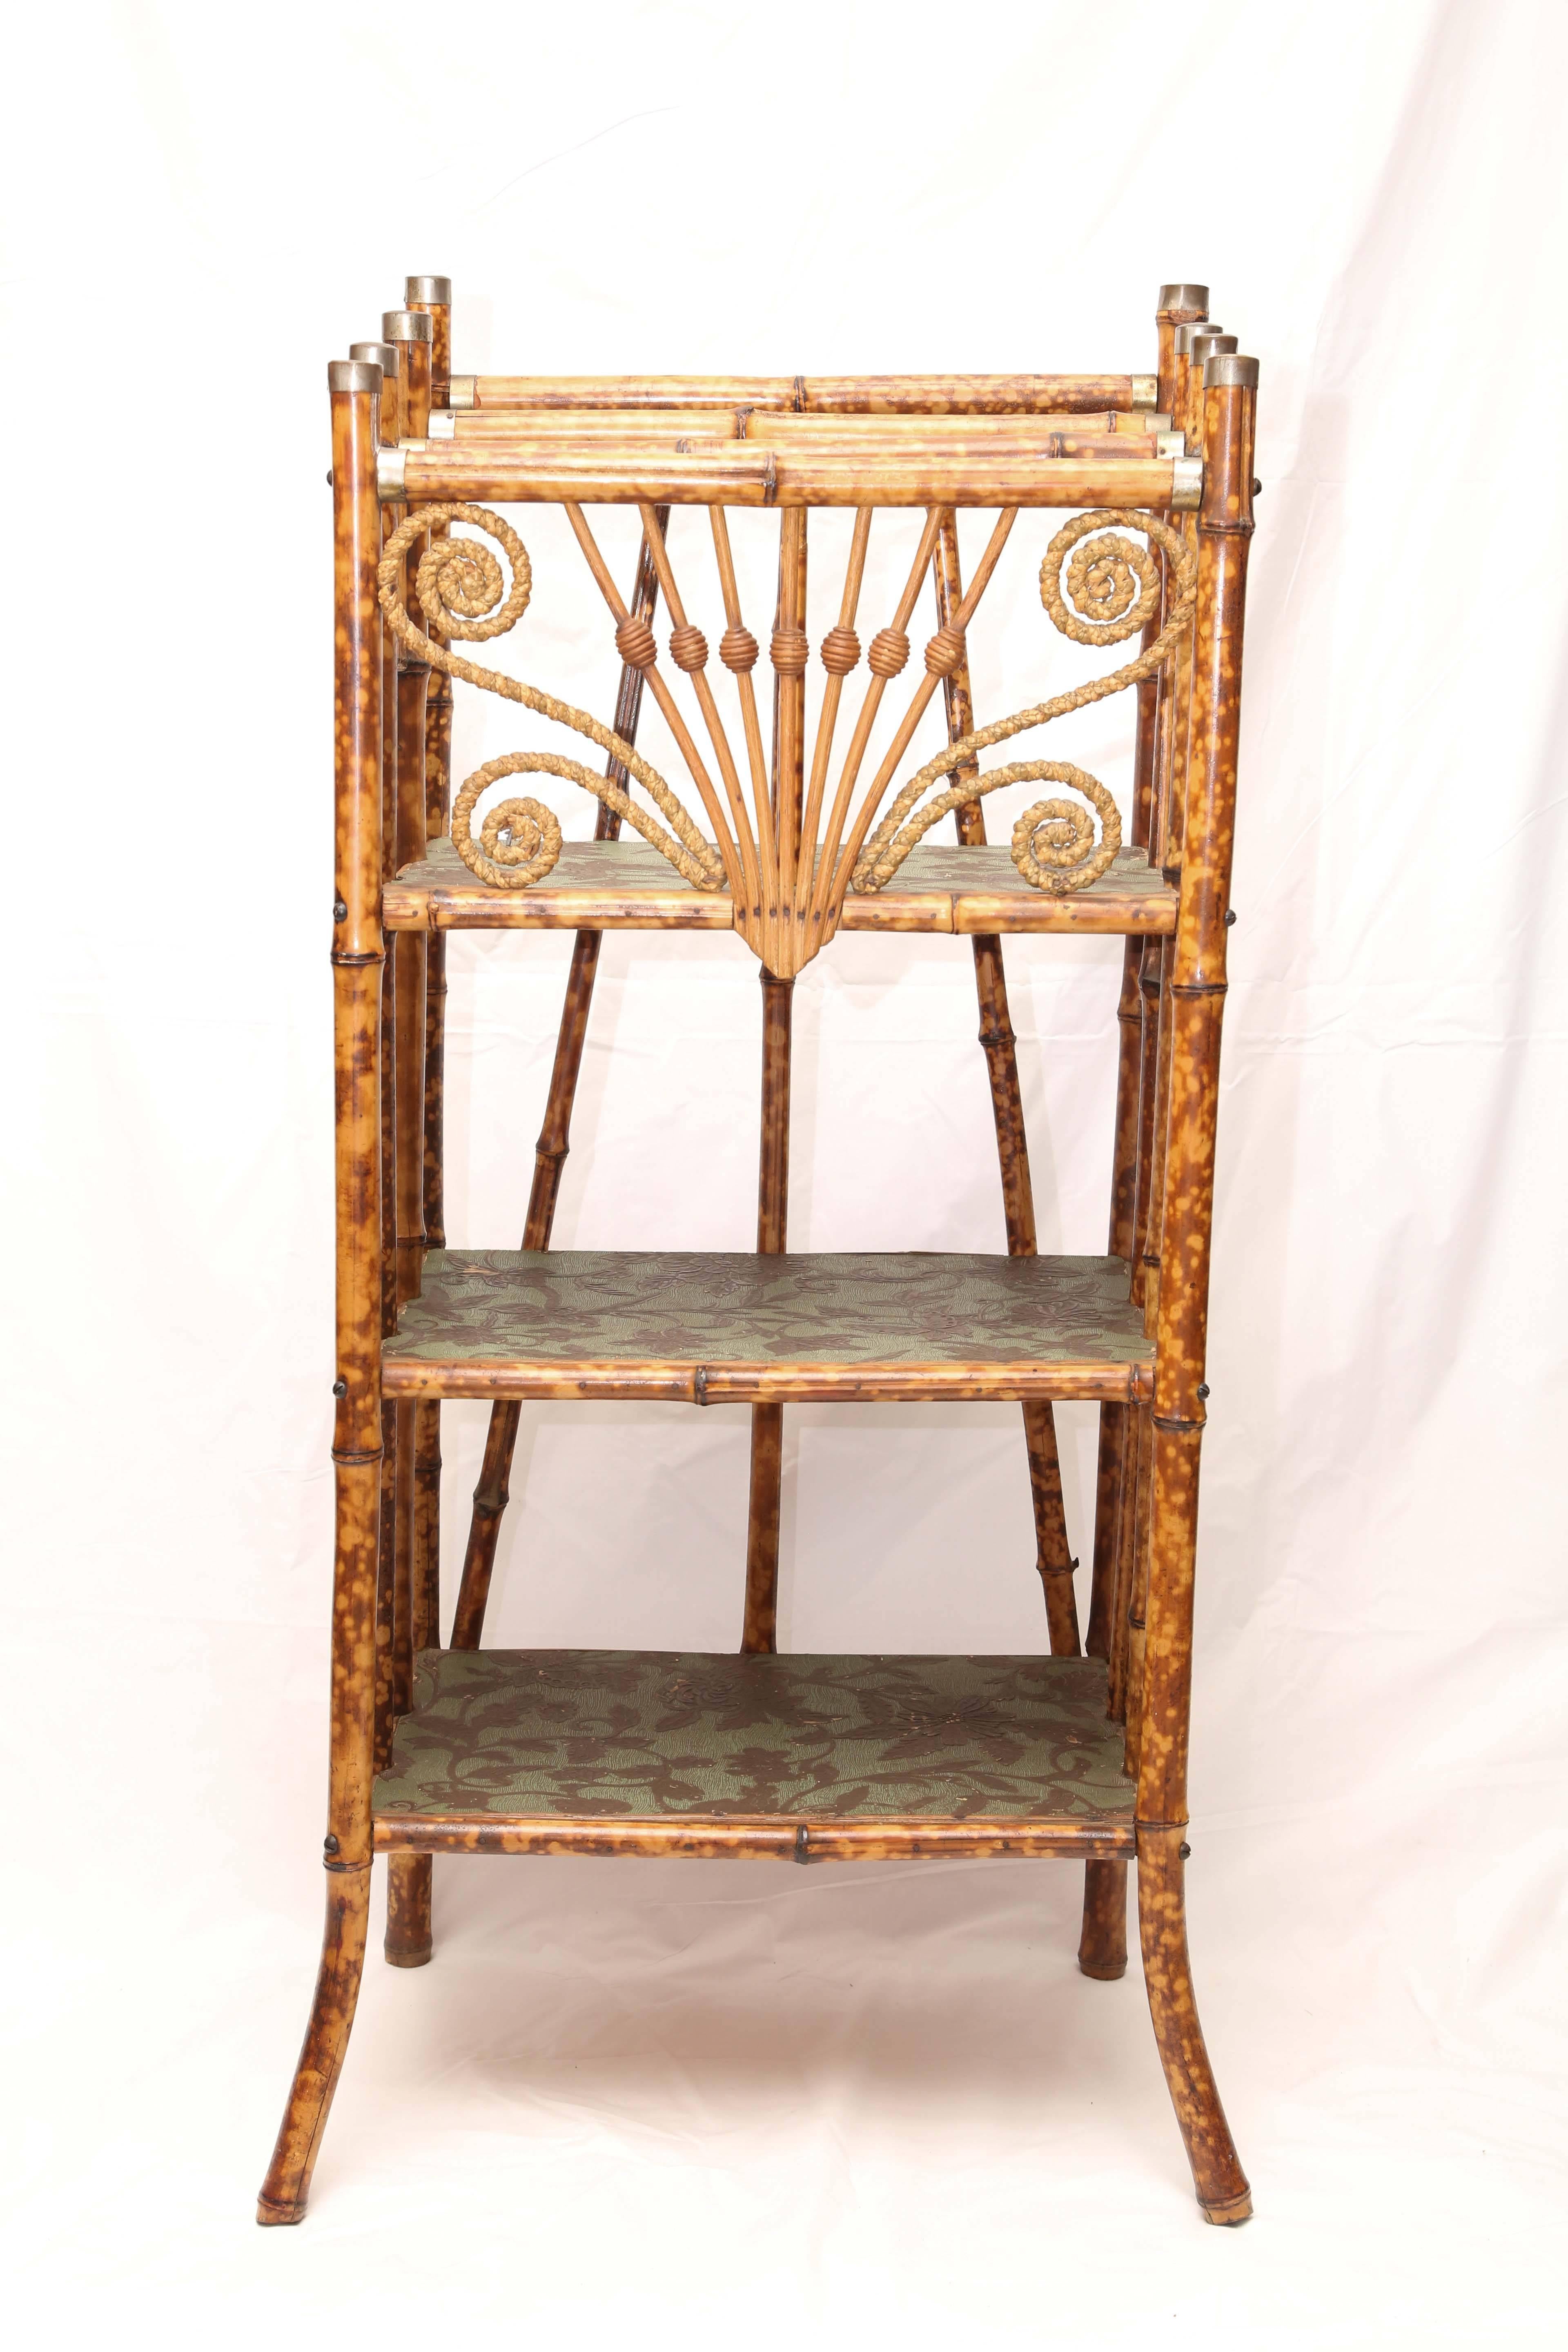 Very unusual 19th century English bamboo Canterbury three tops magazine rack with leather paper and great details.